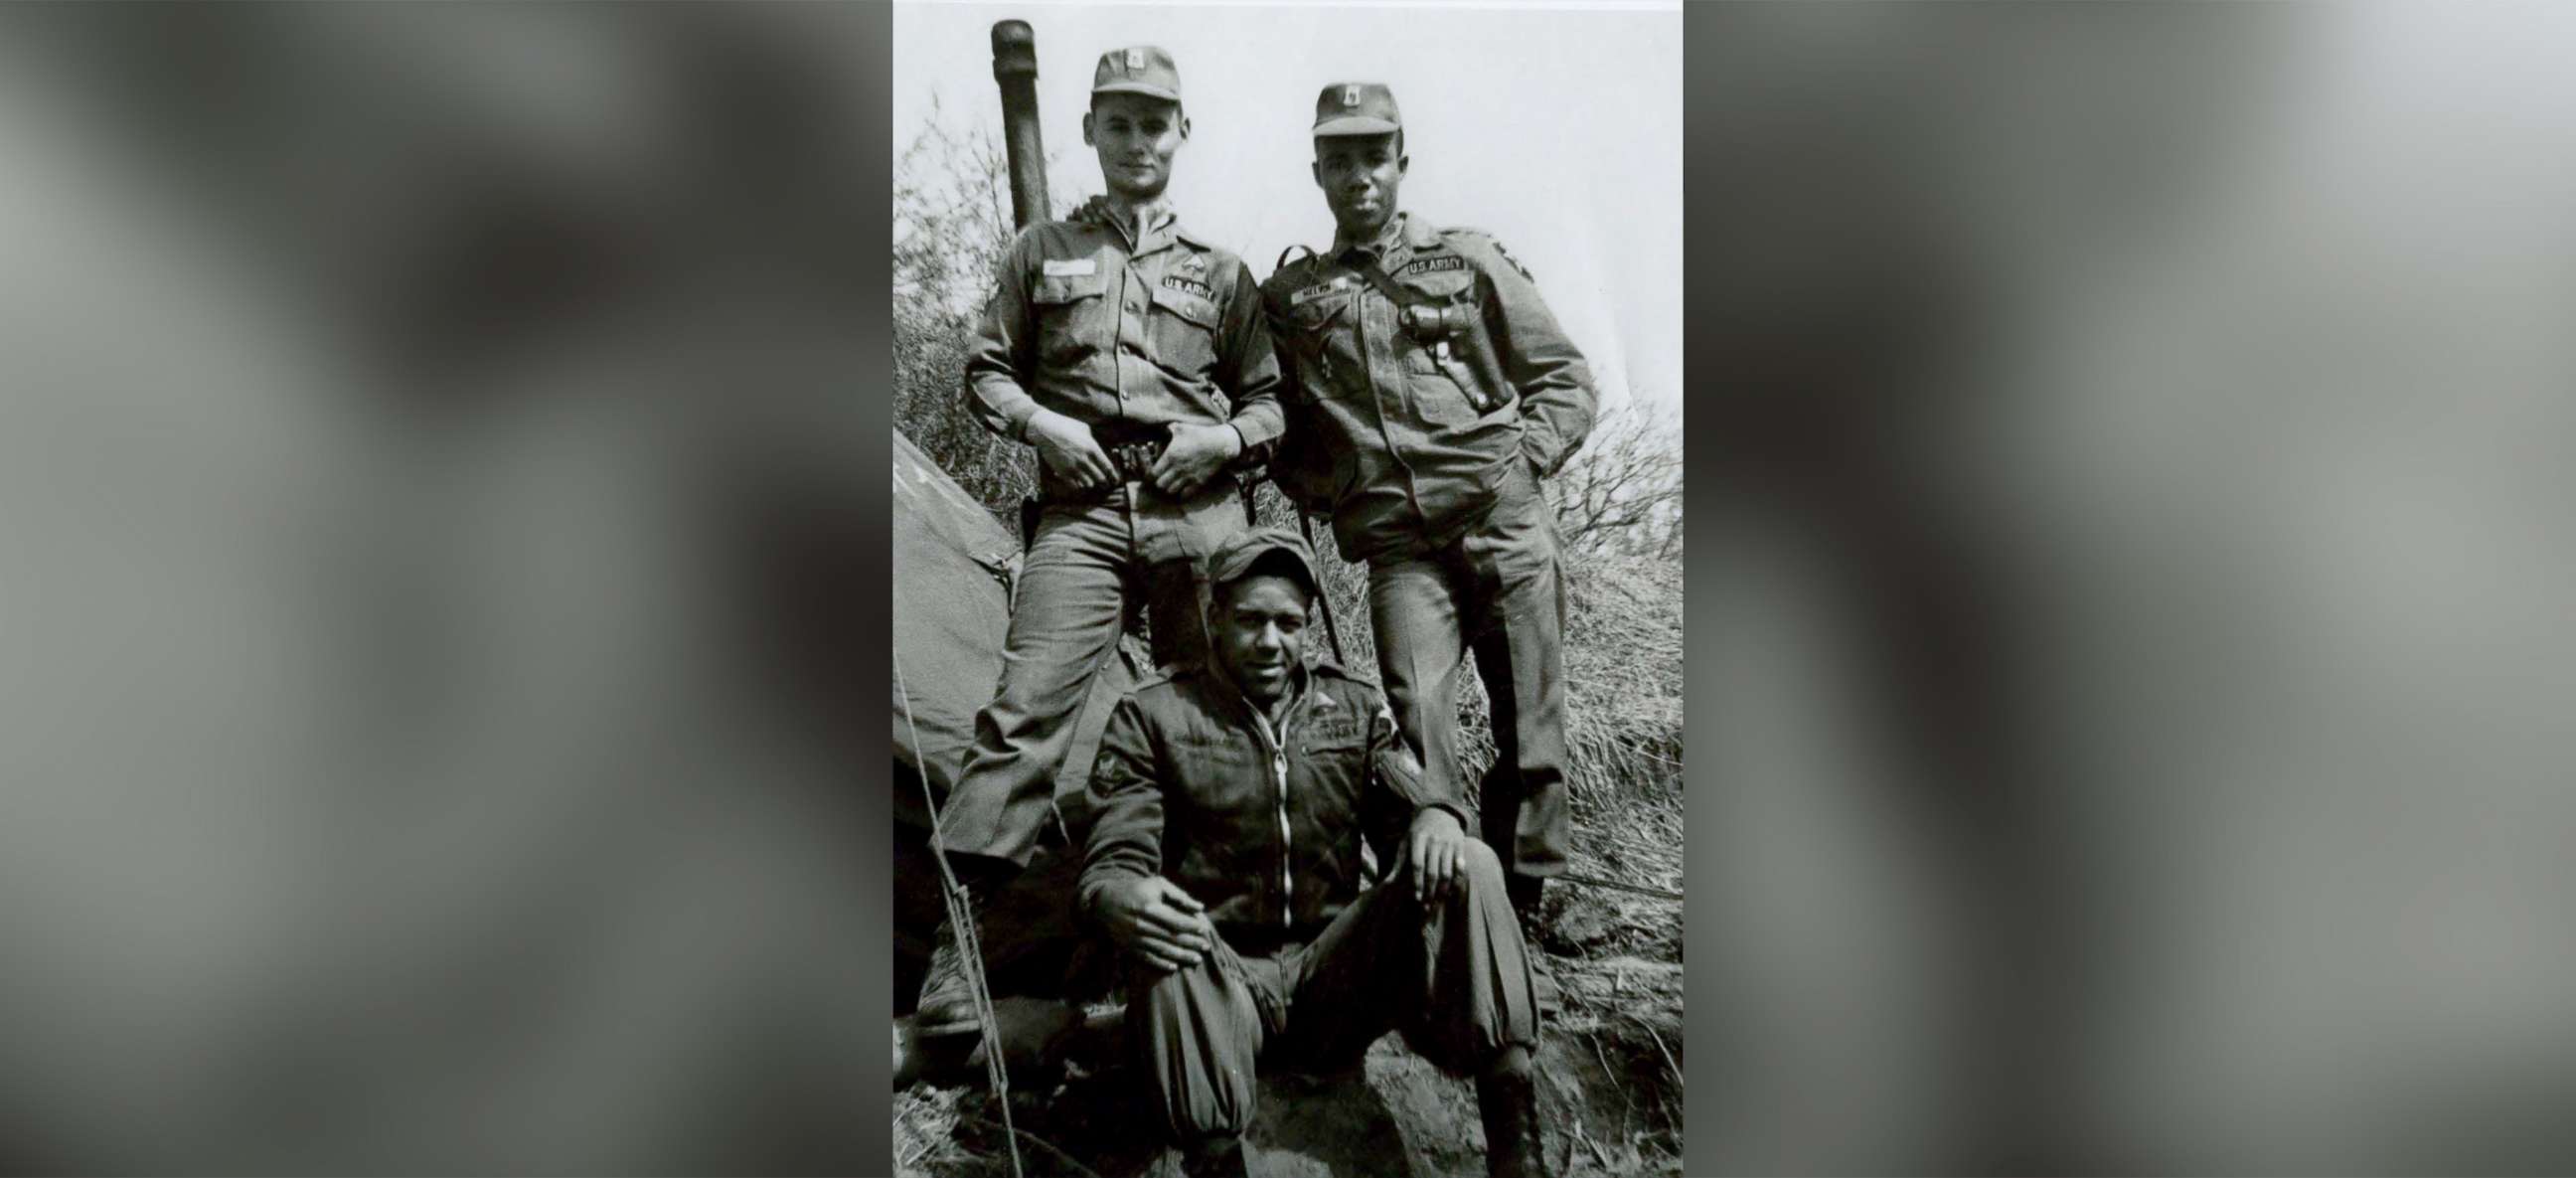 PHOTO: Then-Specialist Dwight Birdwell (left) poses for a photo with his “battle buddies” Spc. Larry Melvin(right) and Spc. Rollins Cunnigham (seated), while assigned to the 2nd Infantry Division in South Korea, 1967.